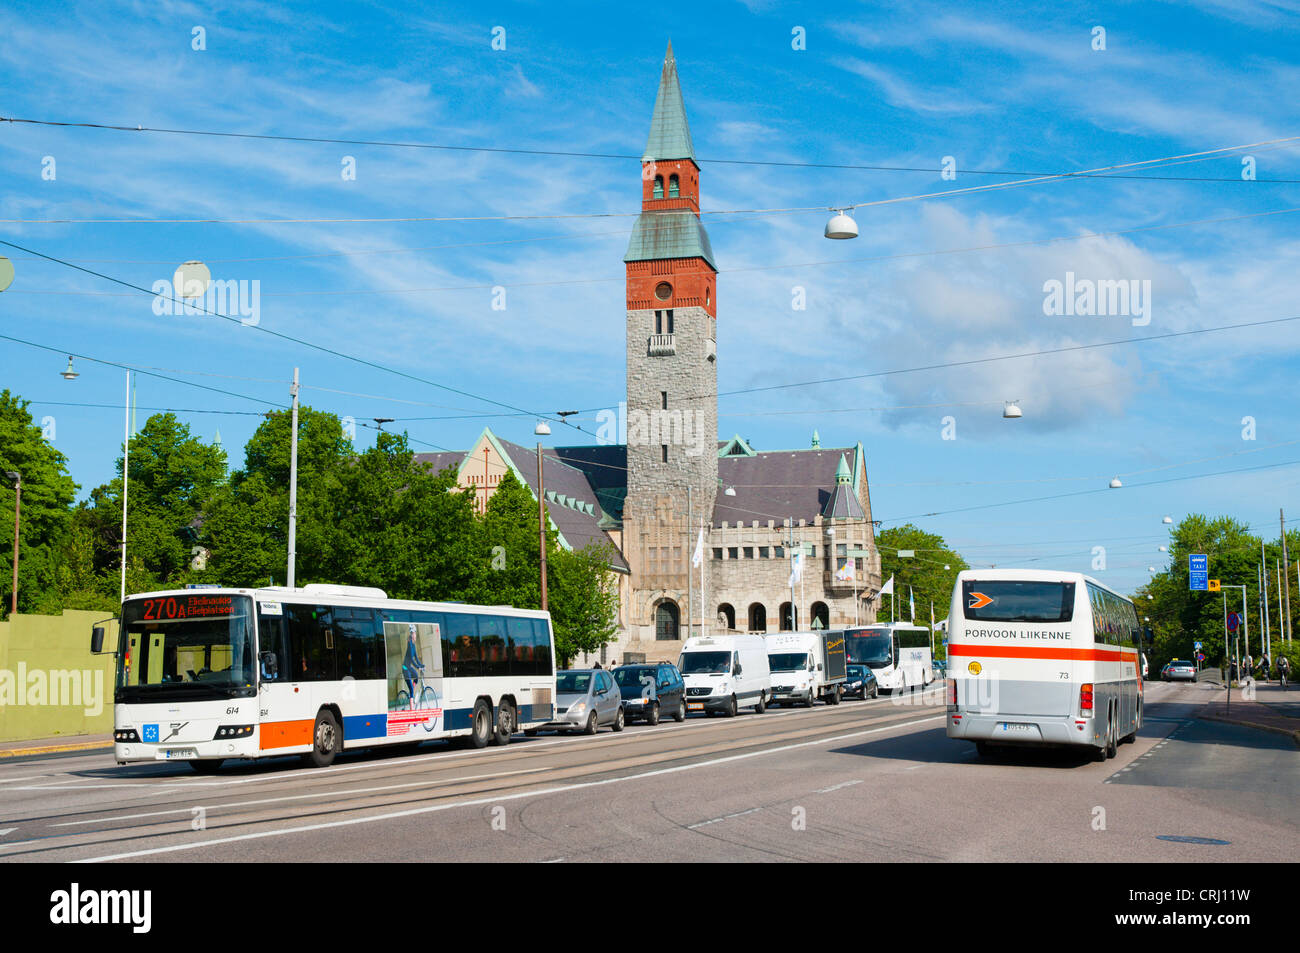 Traffic on Mannerheimintie street in front of Kansallismuseo the National Museum building central Helsinki Finland Europe Stock Photo